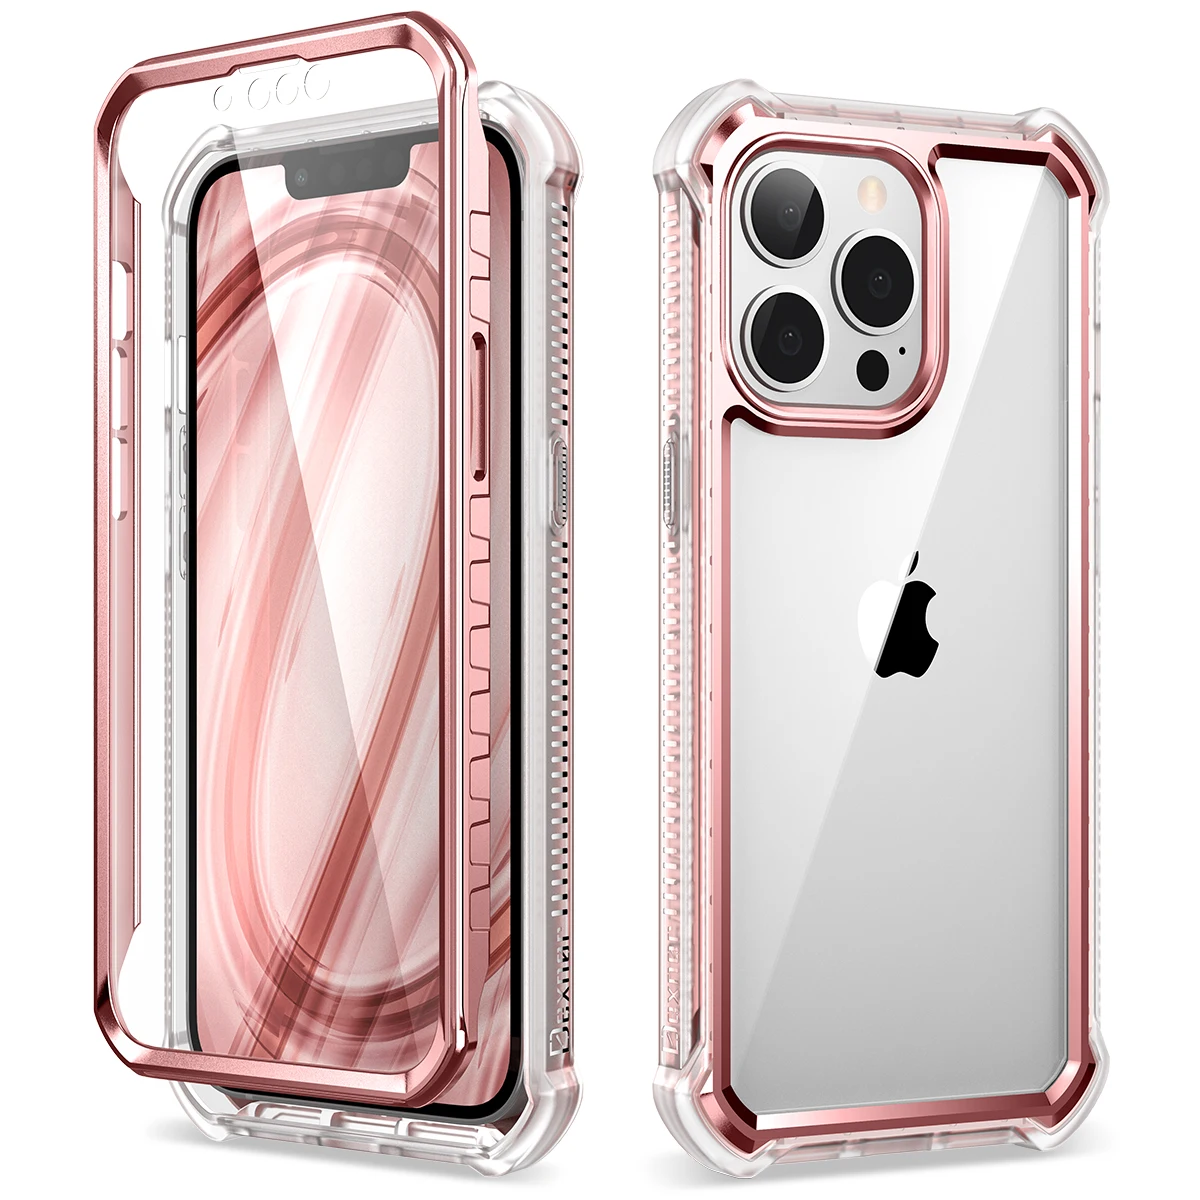 

SURITCH Luxury Anti-Bump Rugged Transparent Clear Case for iPhone 13 Pro Max With Built-in Screen Protector Plating Frame Case